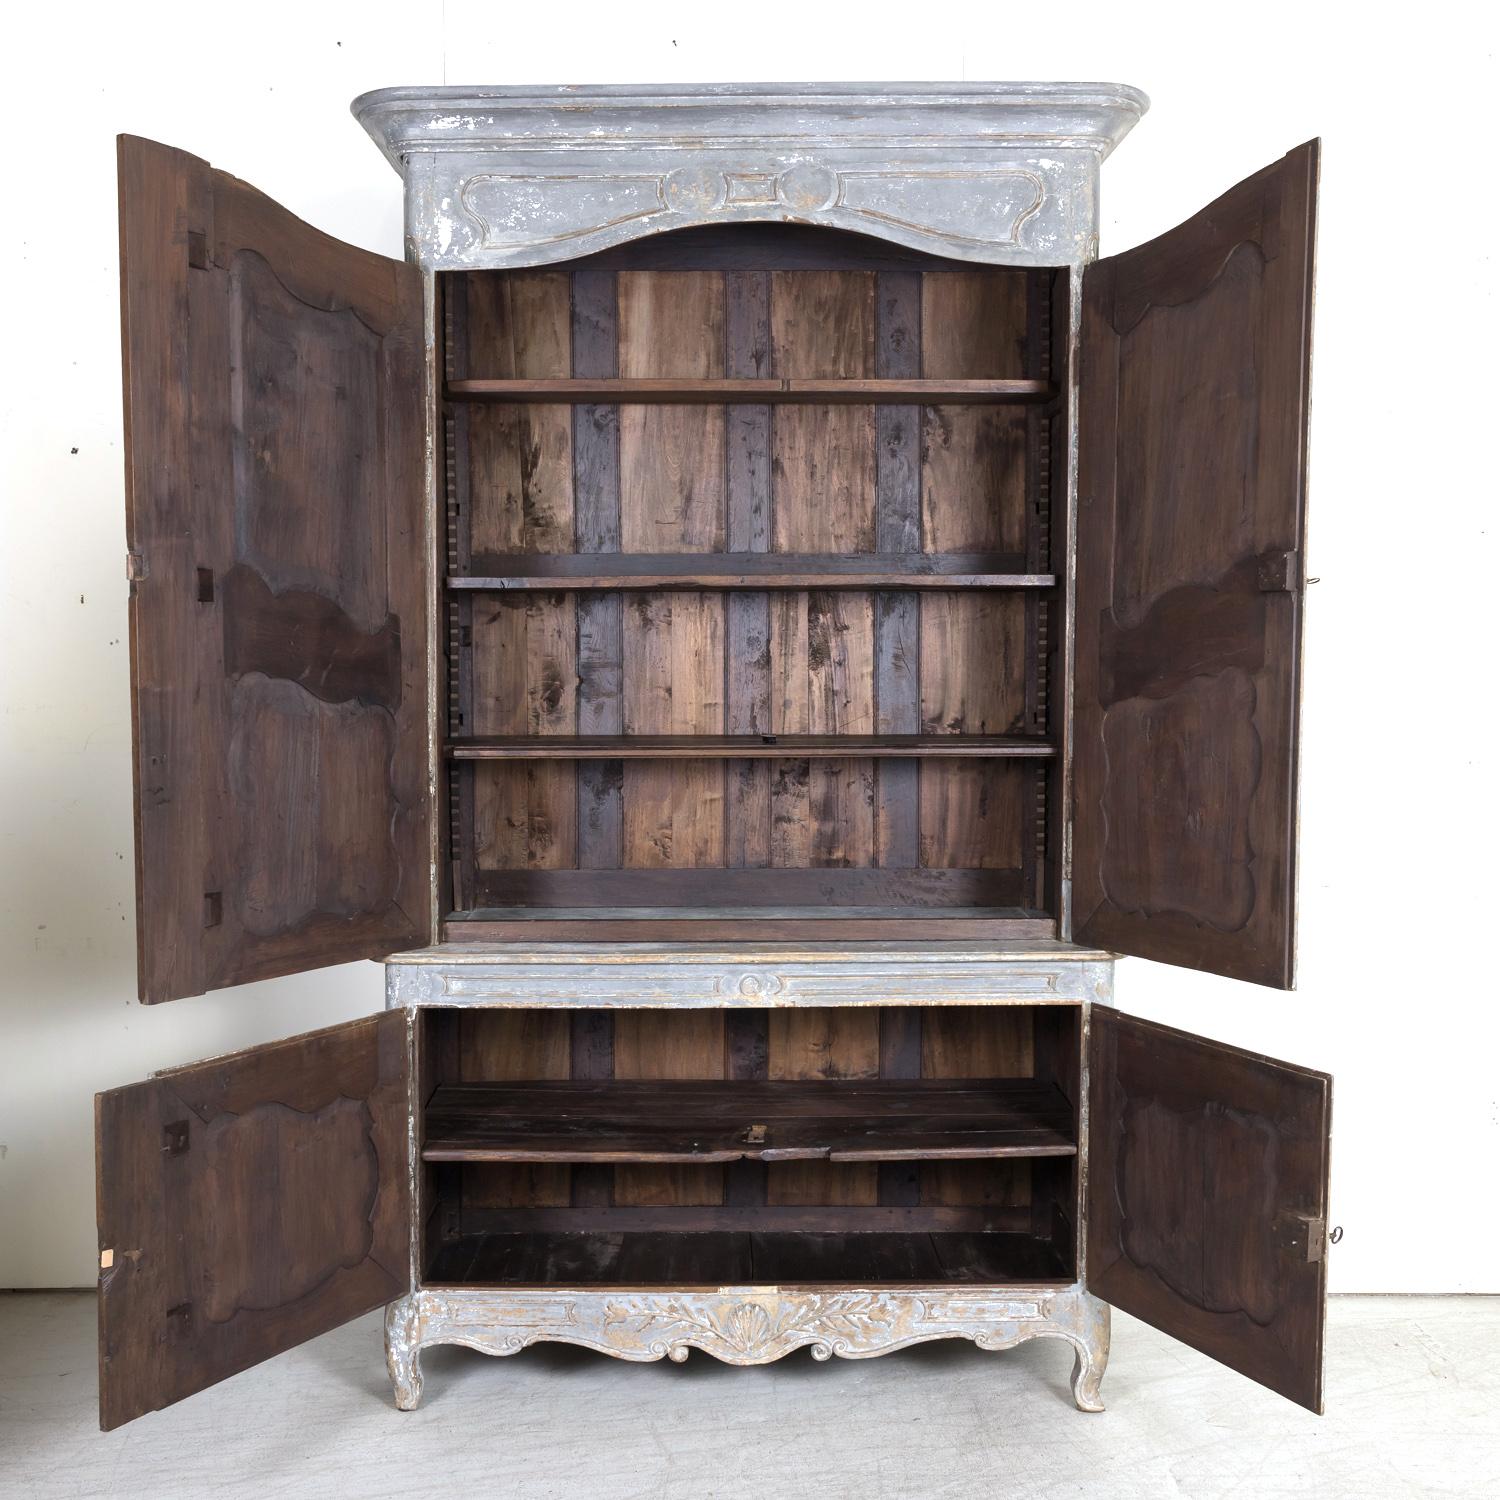 A superb 19th century French Country Louis XV style painted walnut chateau buffet à deux corps handcrafted in walnut by a highly skilled ébéniste in Provence with a beautiful bluish gray painted finish showing some wood, circa 1850s. Crowned with a